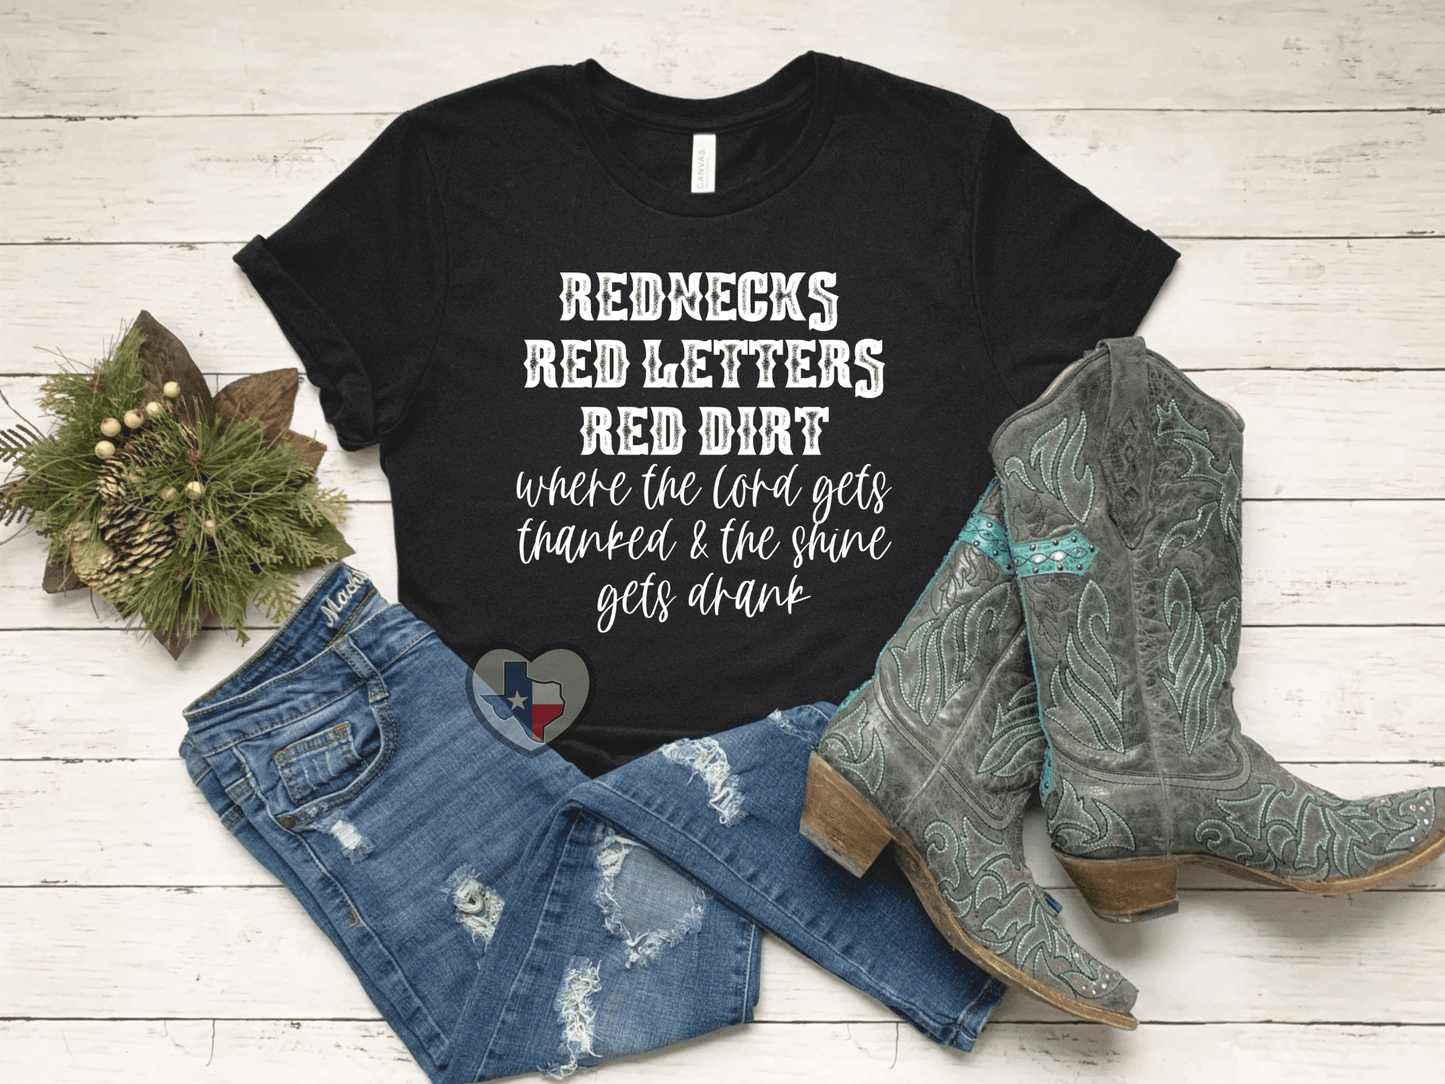 Red Necks, Red Dirt, Red Letters - Texas Transfers and Designs